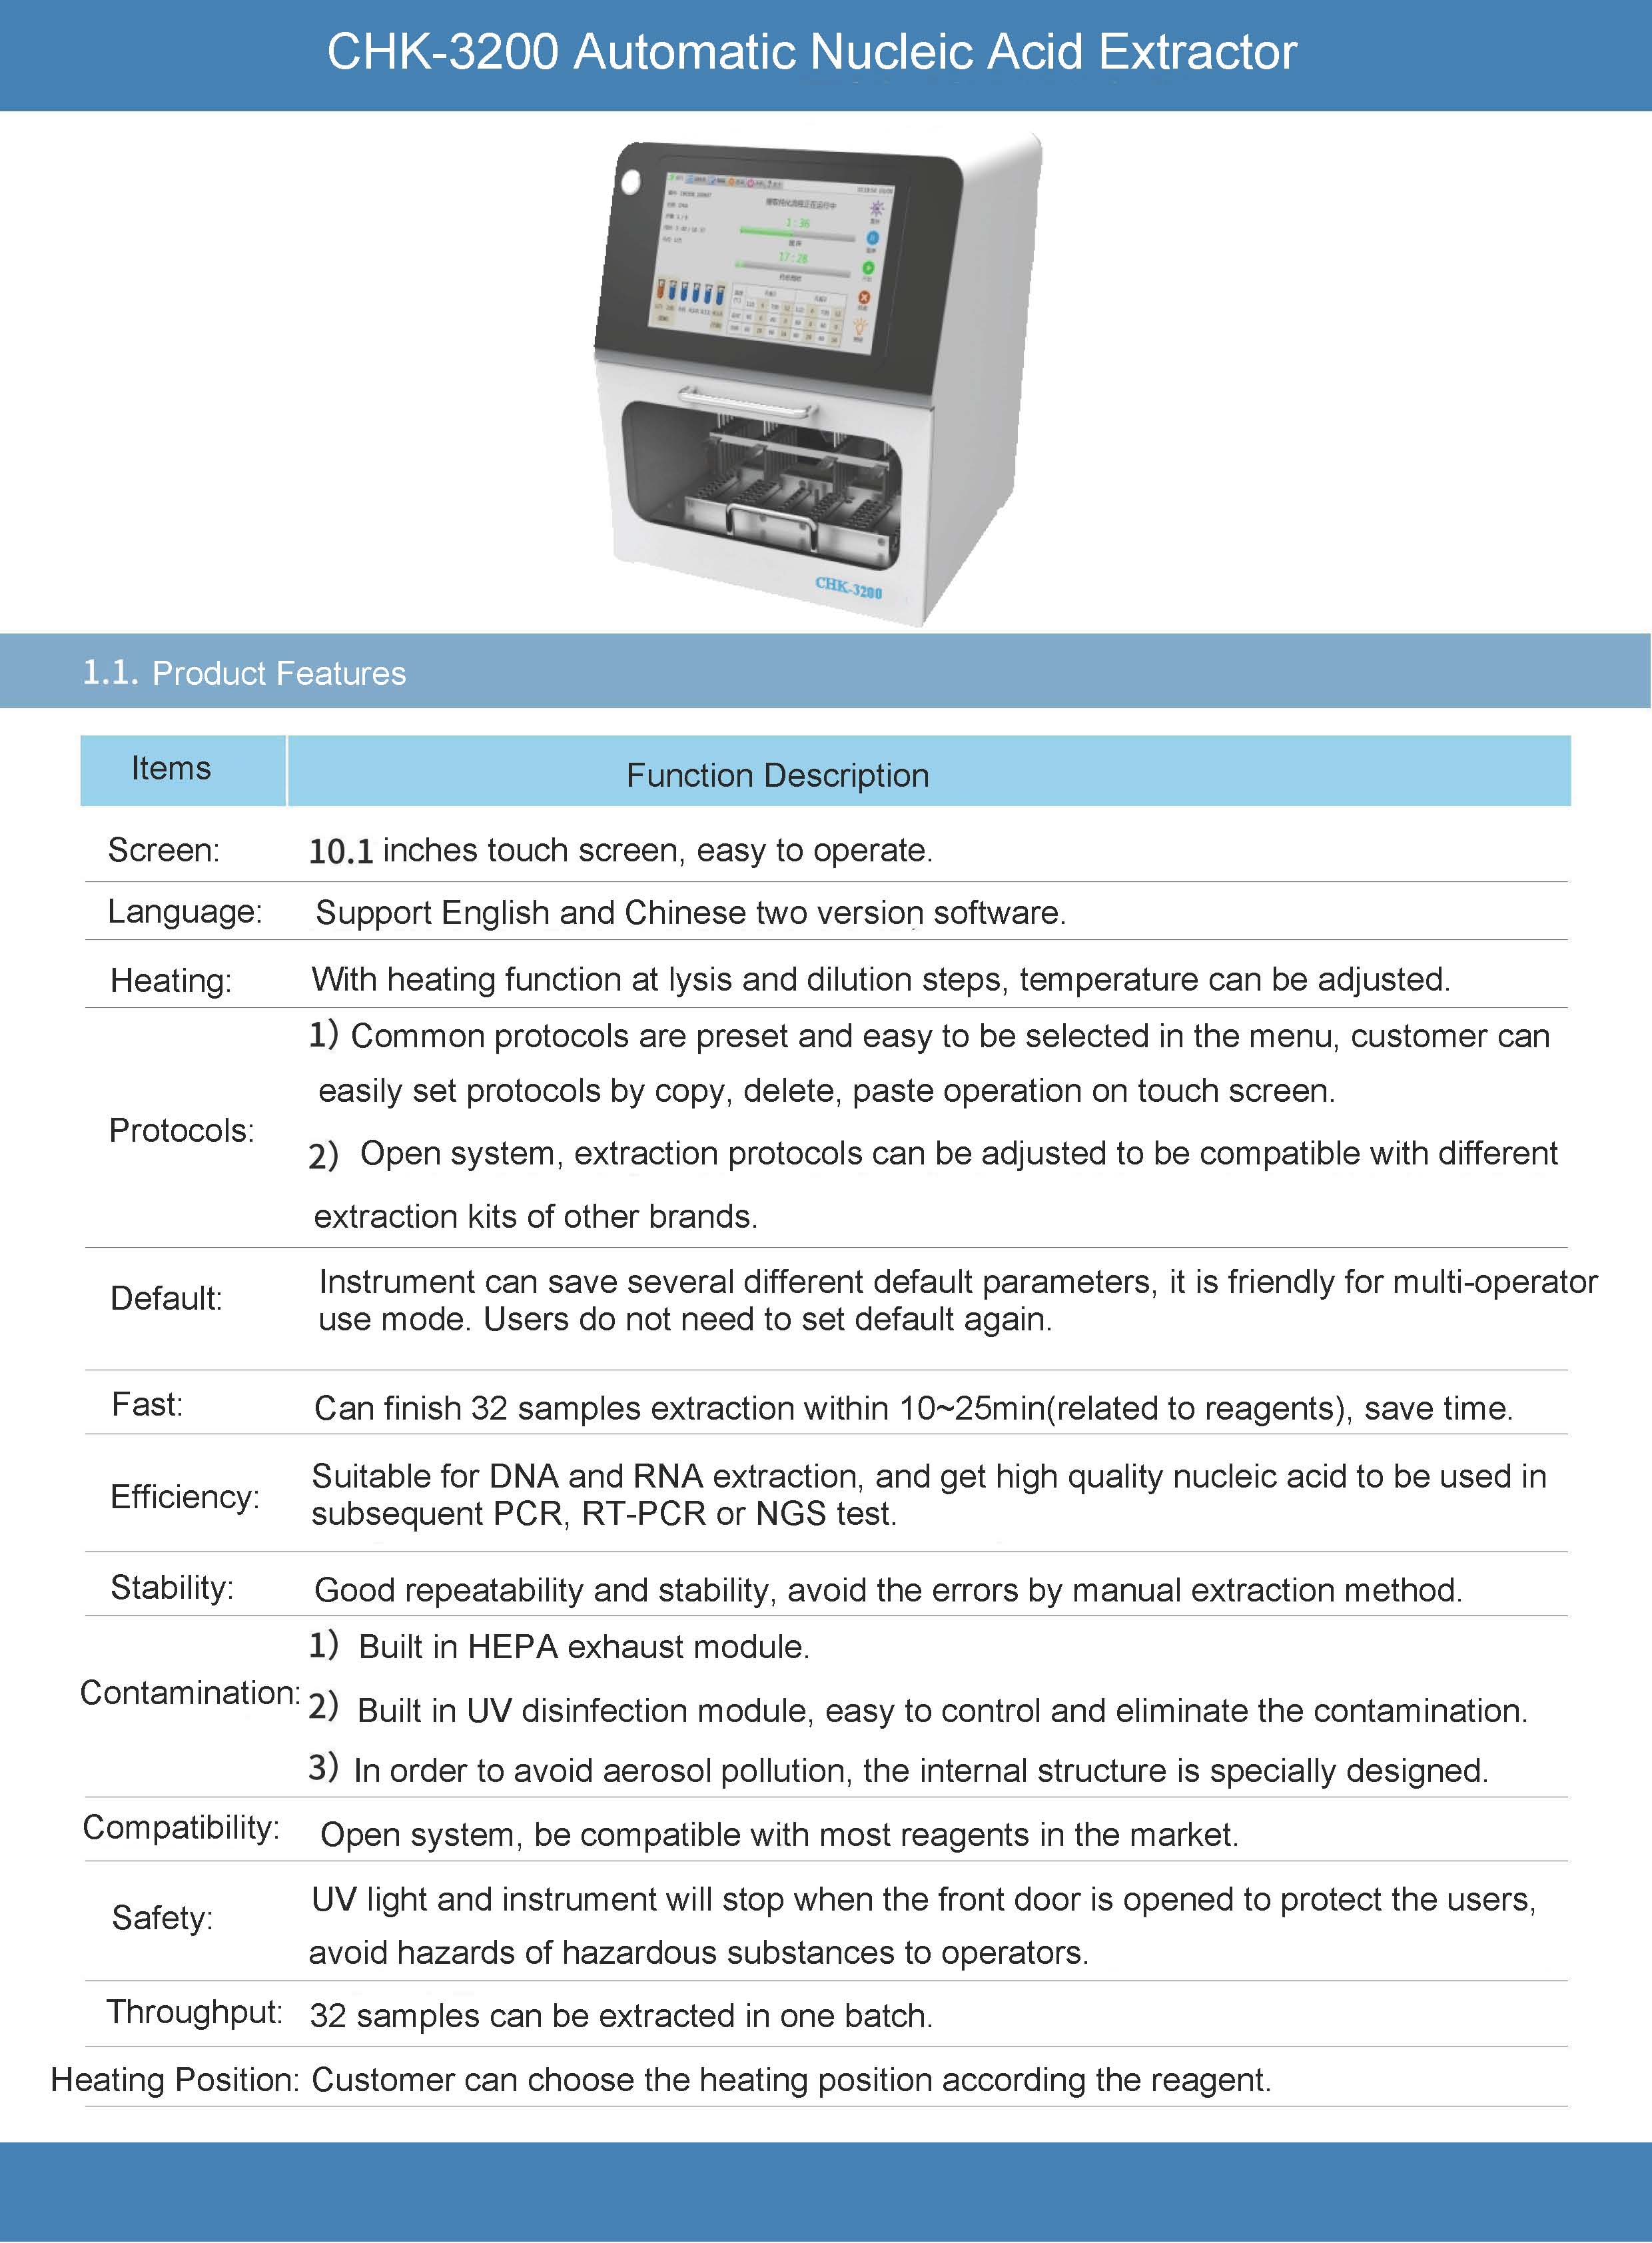 CHK-3200 Nucleic Acid Extractor-Flyer_页面_1